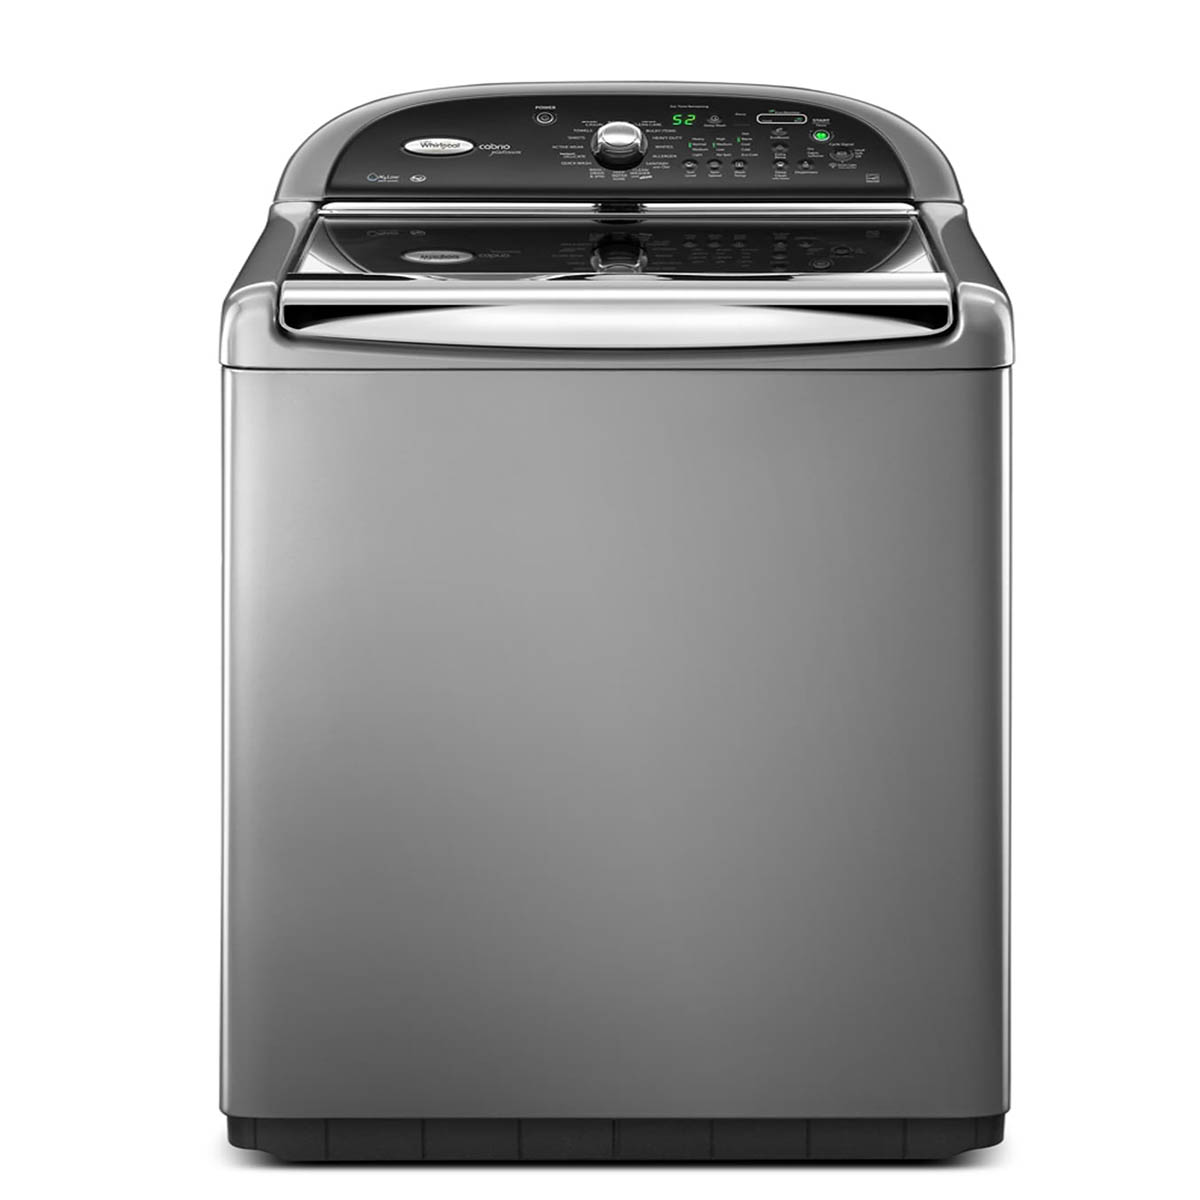 How To Fix The Error Code F52 For Whirlpool Washer